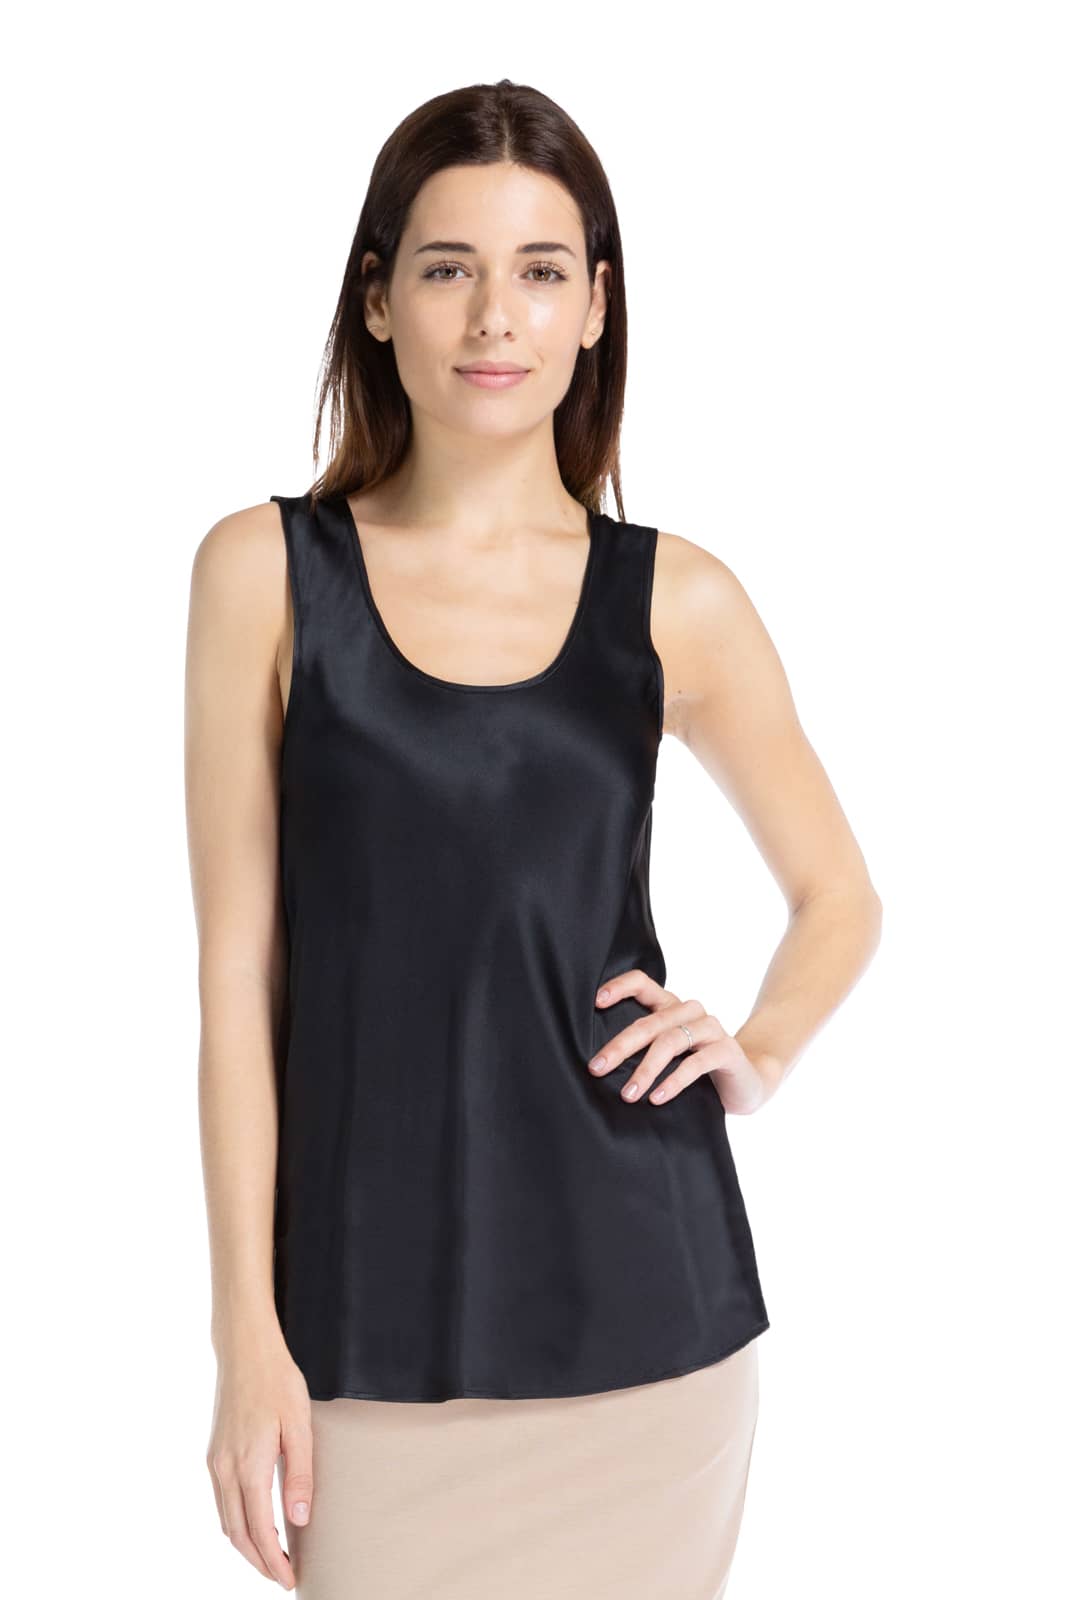 Buy Marks & Spencer Women Black Solid Silk Camisole Top - Tops for Women  11095628